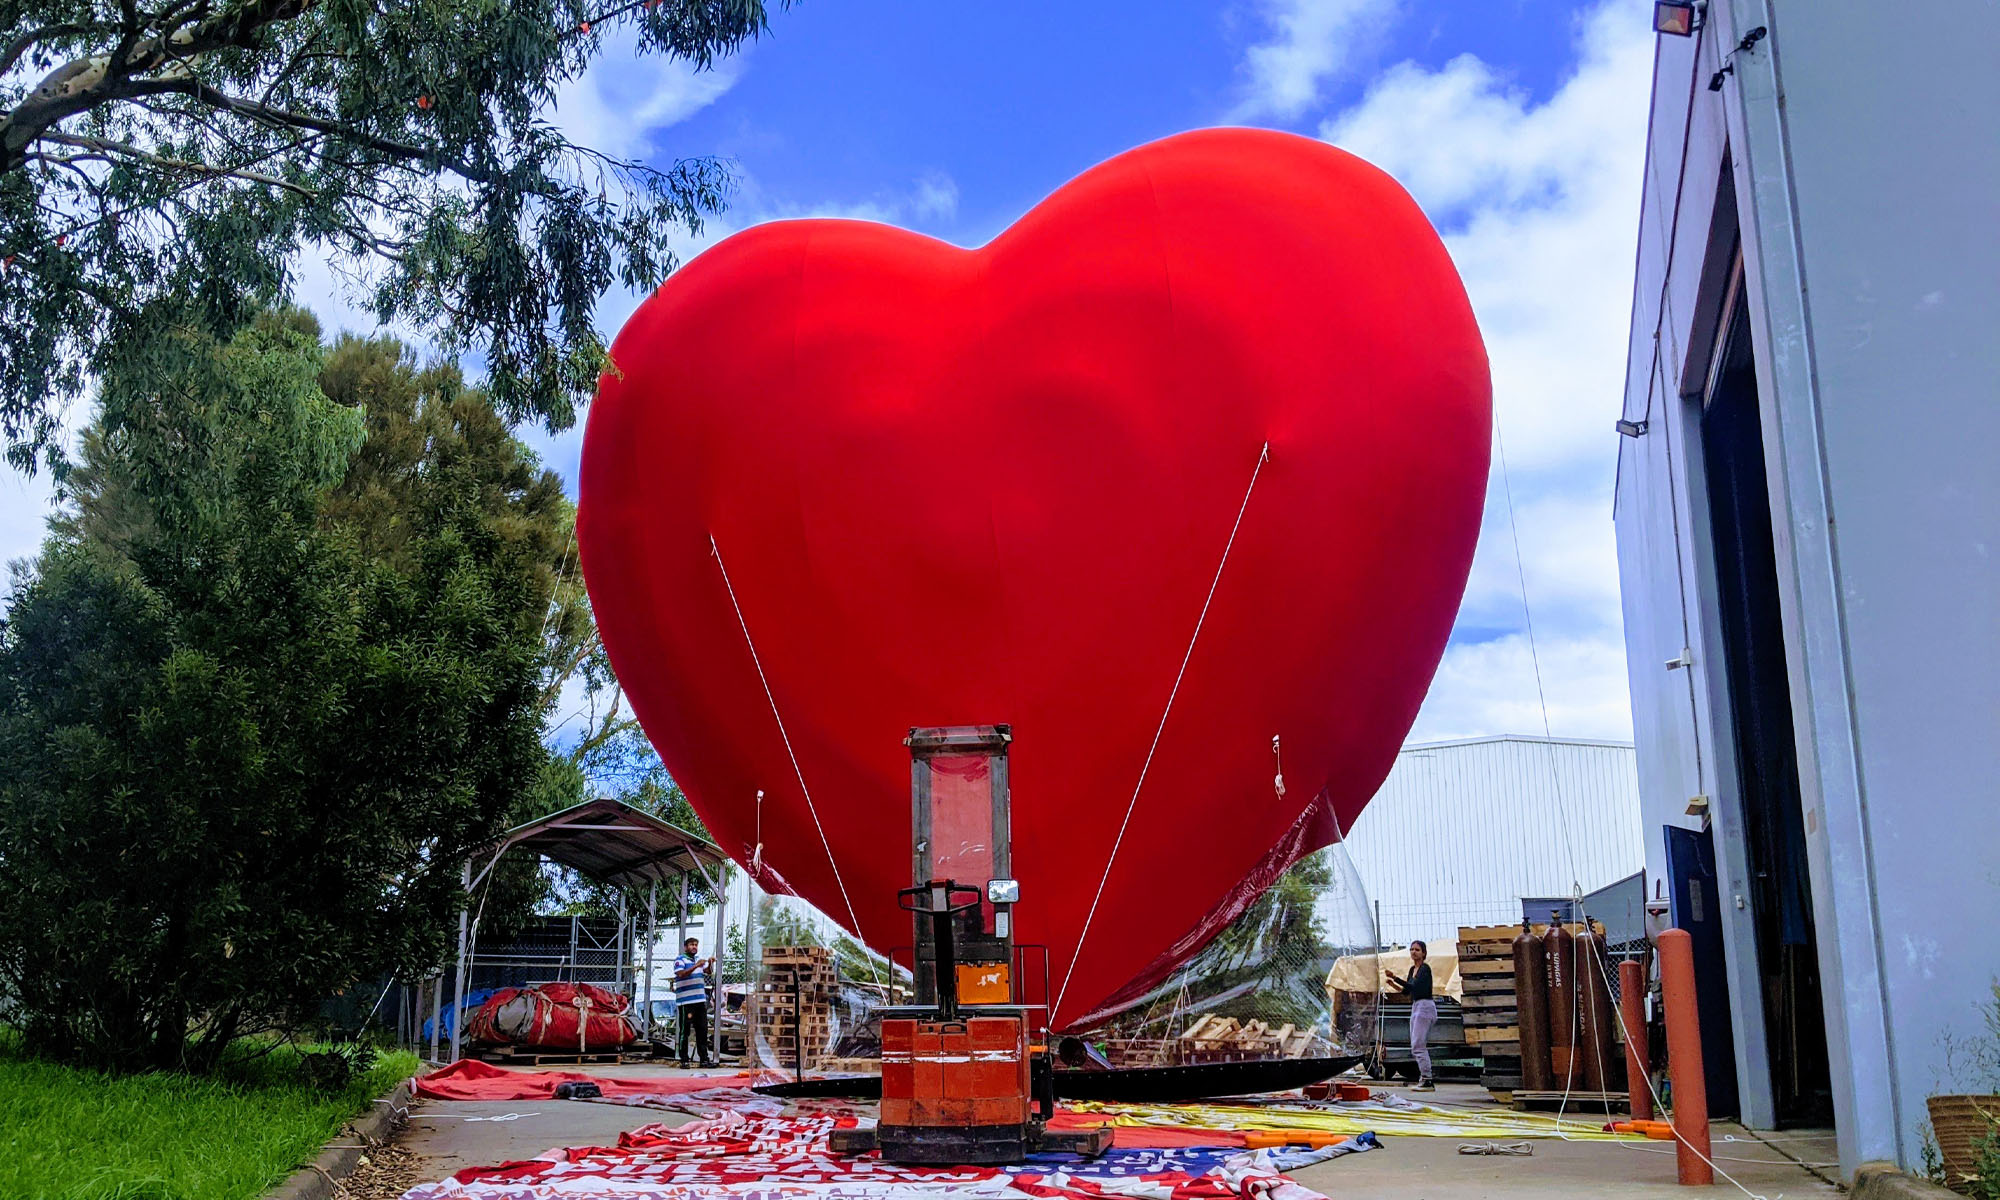 The Inflatables team created the love symbol with a matte polyester material selected for its light-absorbing properties and ability to stretch without creases.